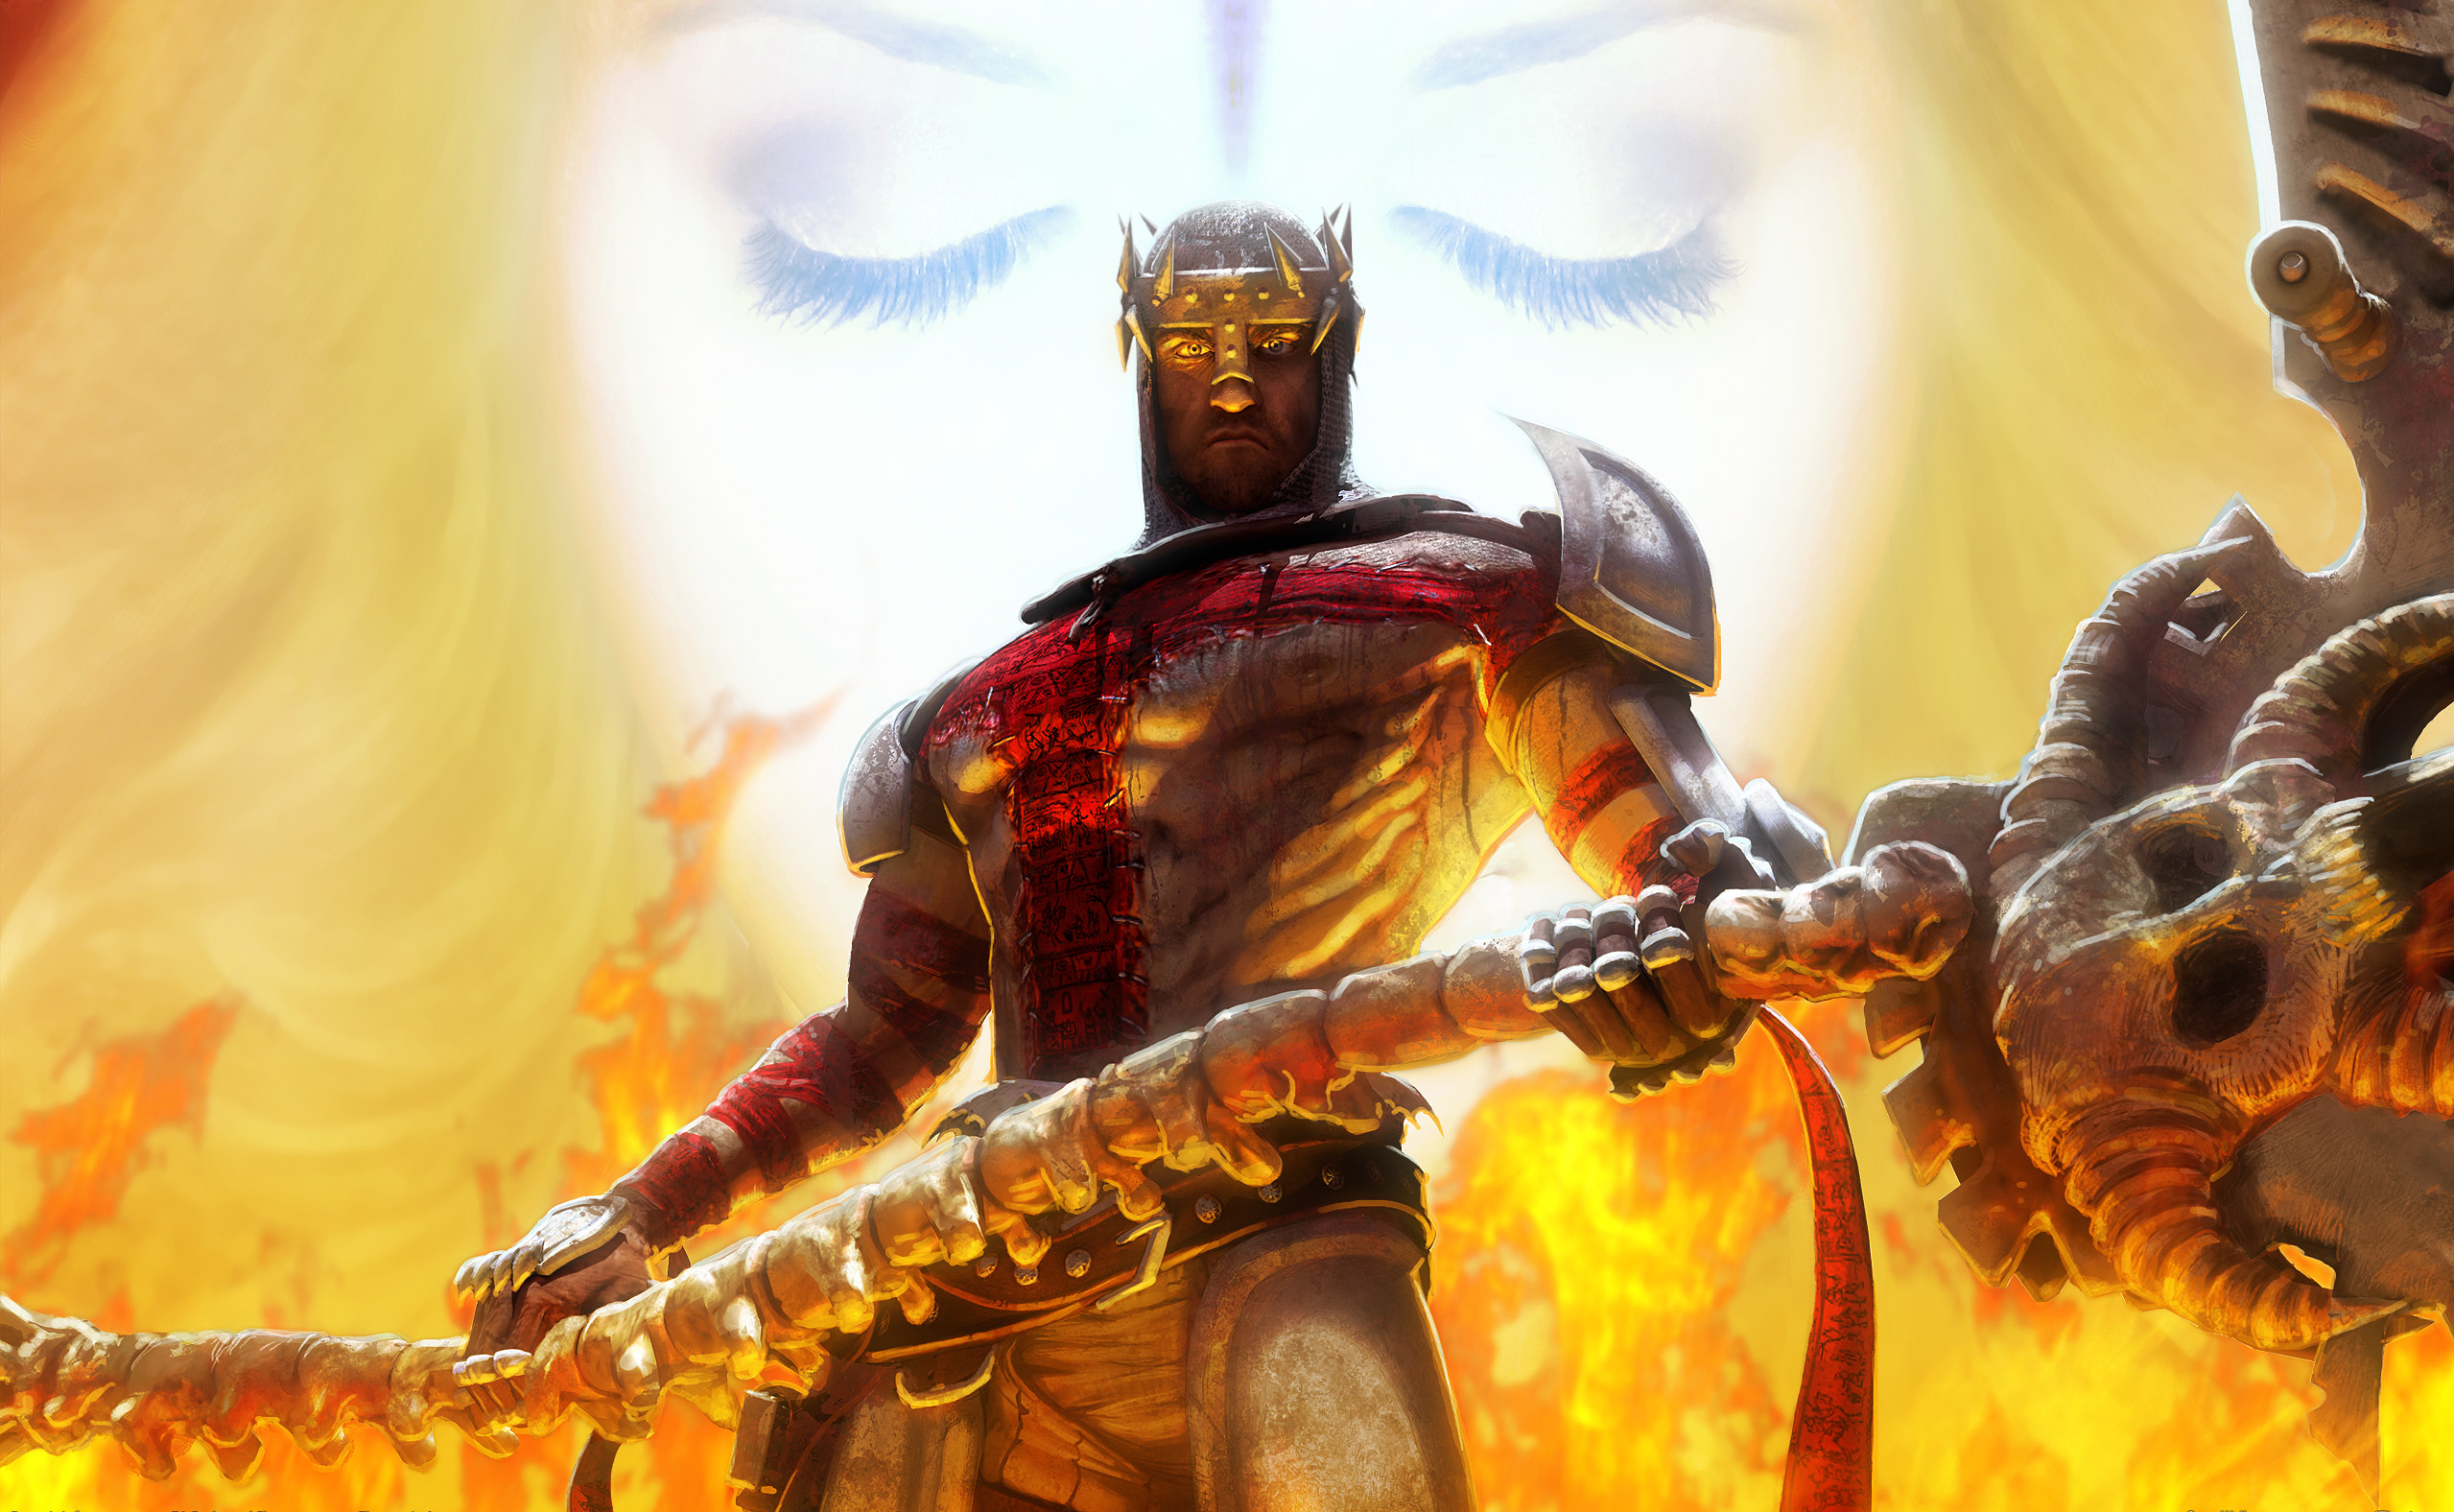 inferno wallpaper,action adventure game,cg artwork,fictional character,demon,knight